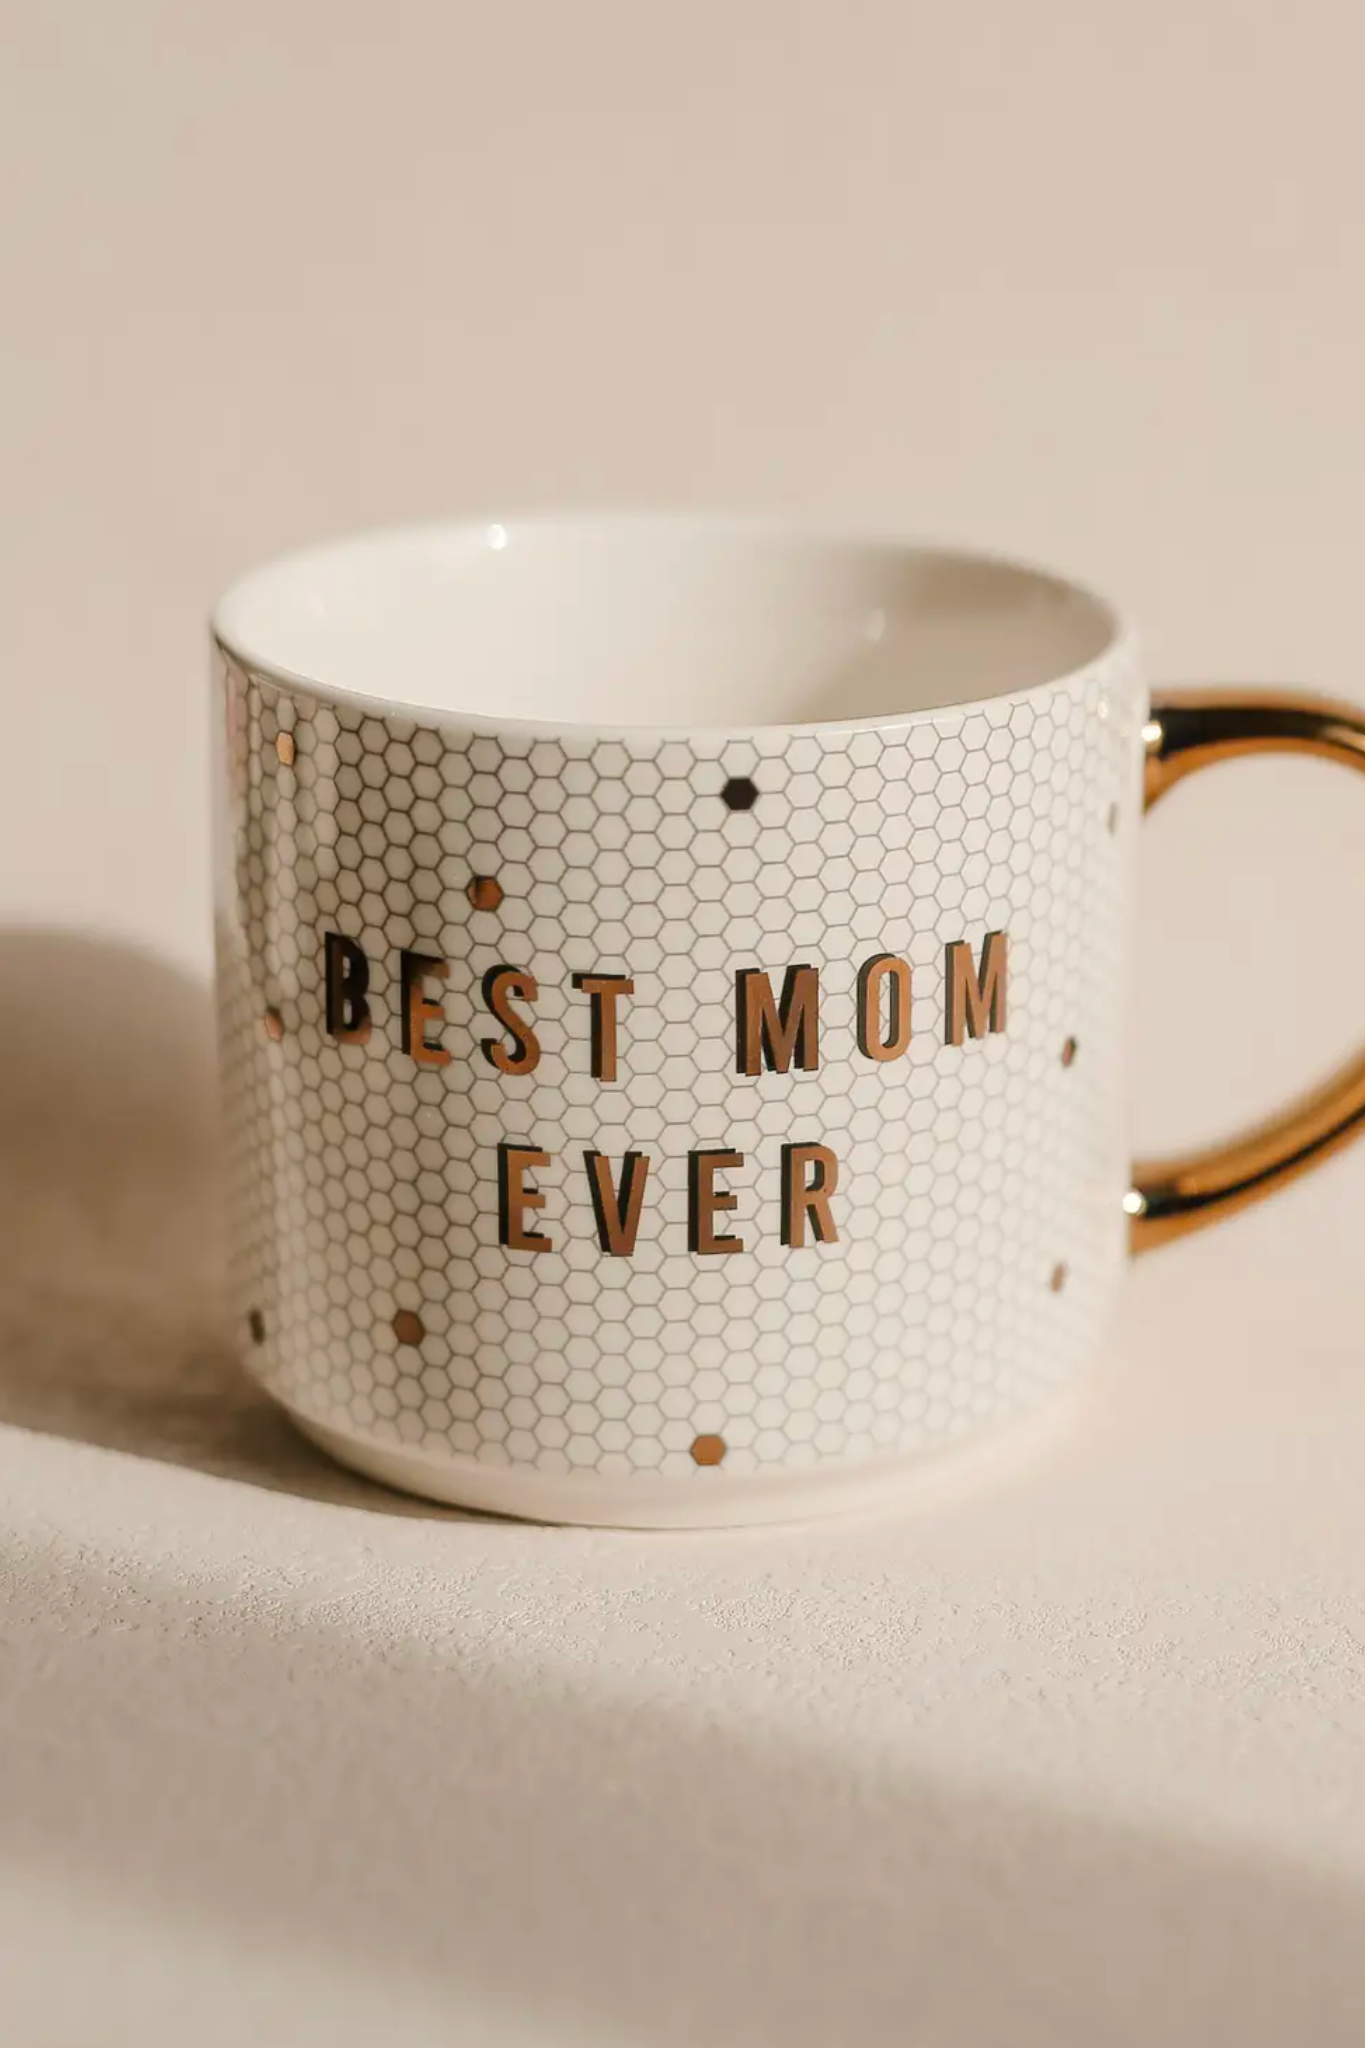 View 1 of Best Mom Ever Tiled Mug, a Home & Decor from Larrea Cove. Detail: This sophisticated and stylish, Best Mom Ever Tiled Mug is the perfe...